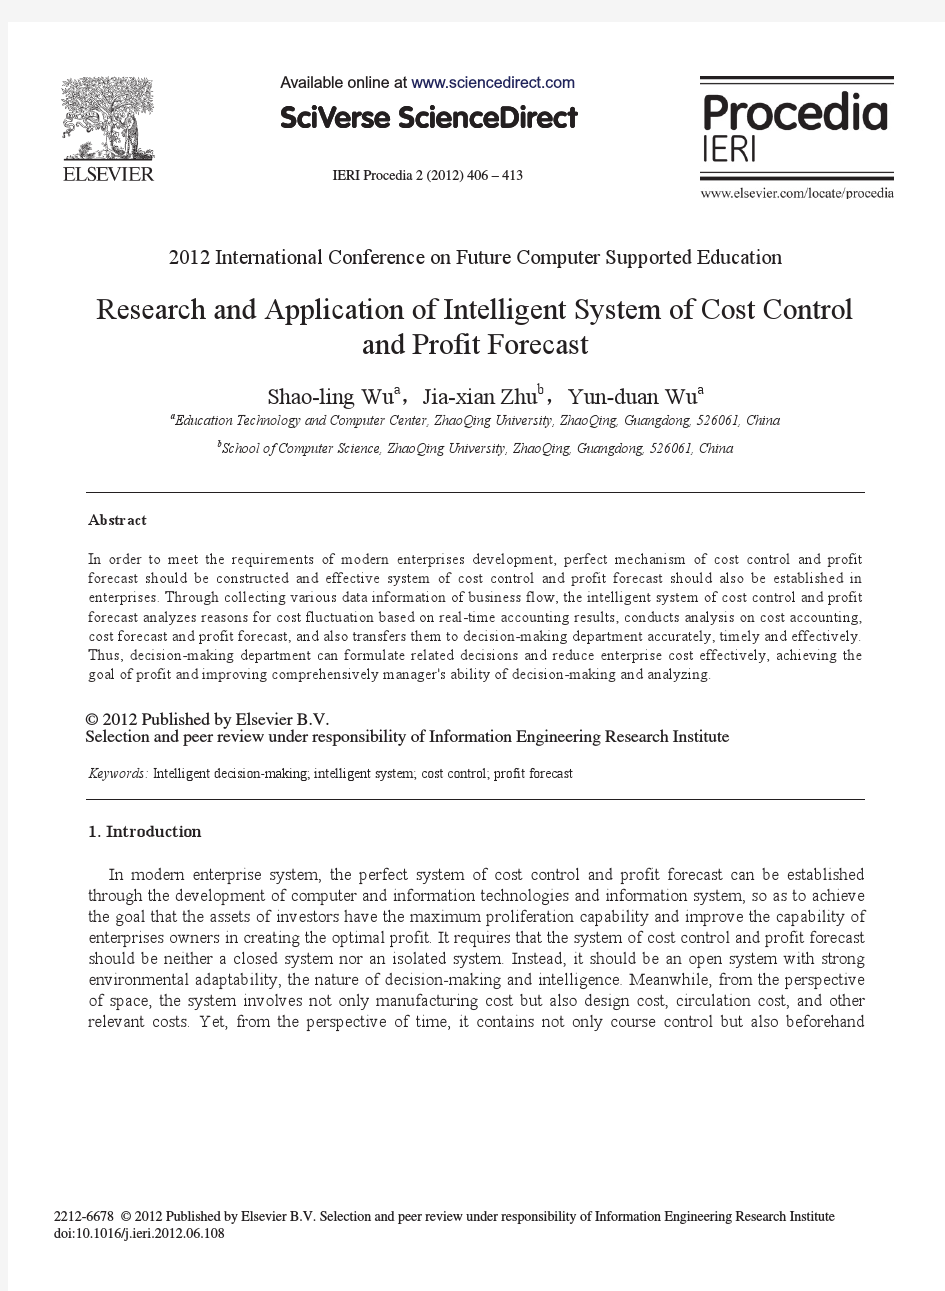 Research and Application of Intelligent System of Cost Control and Profit Forecast (2)